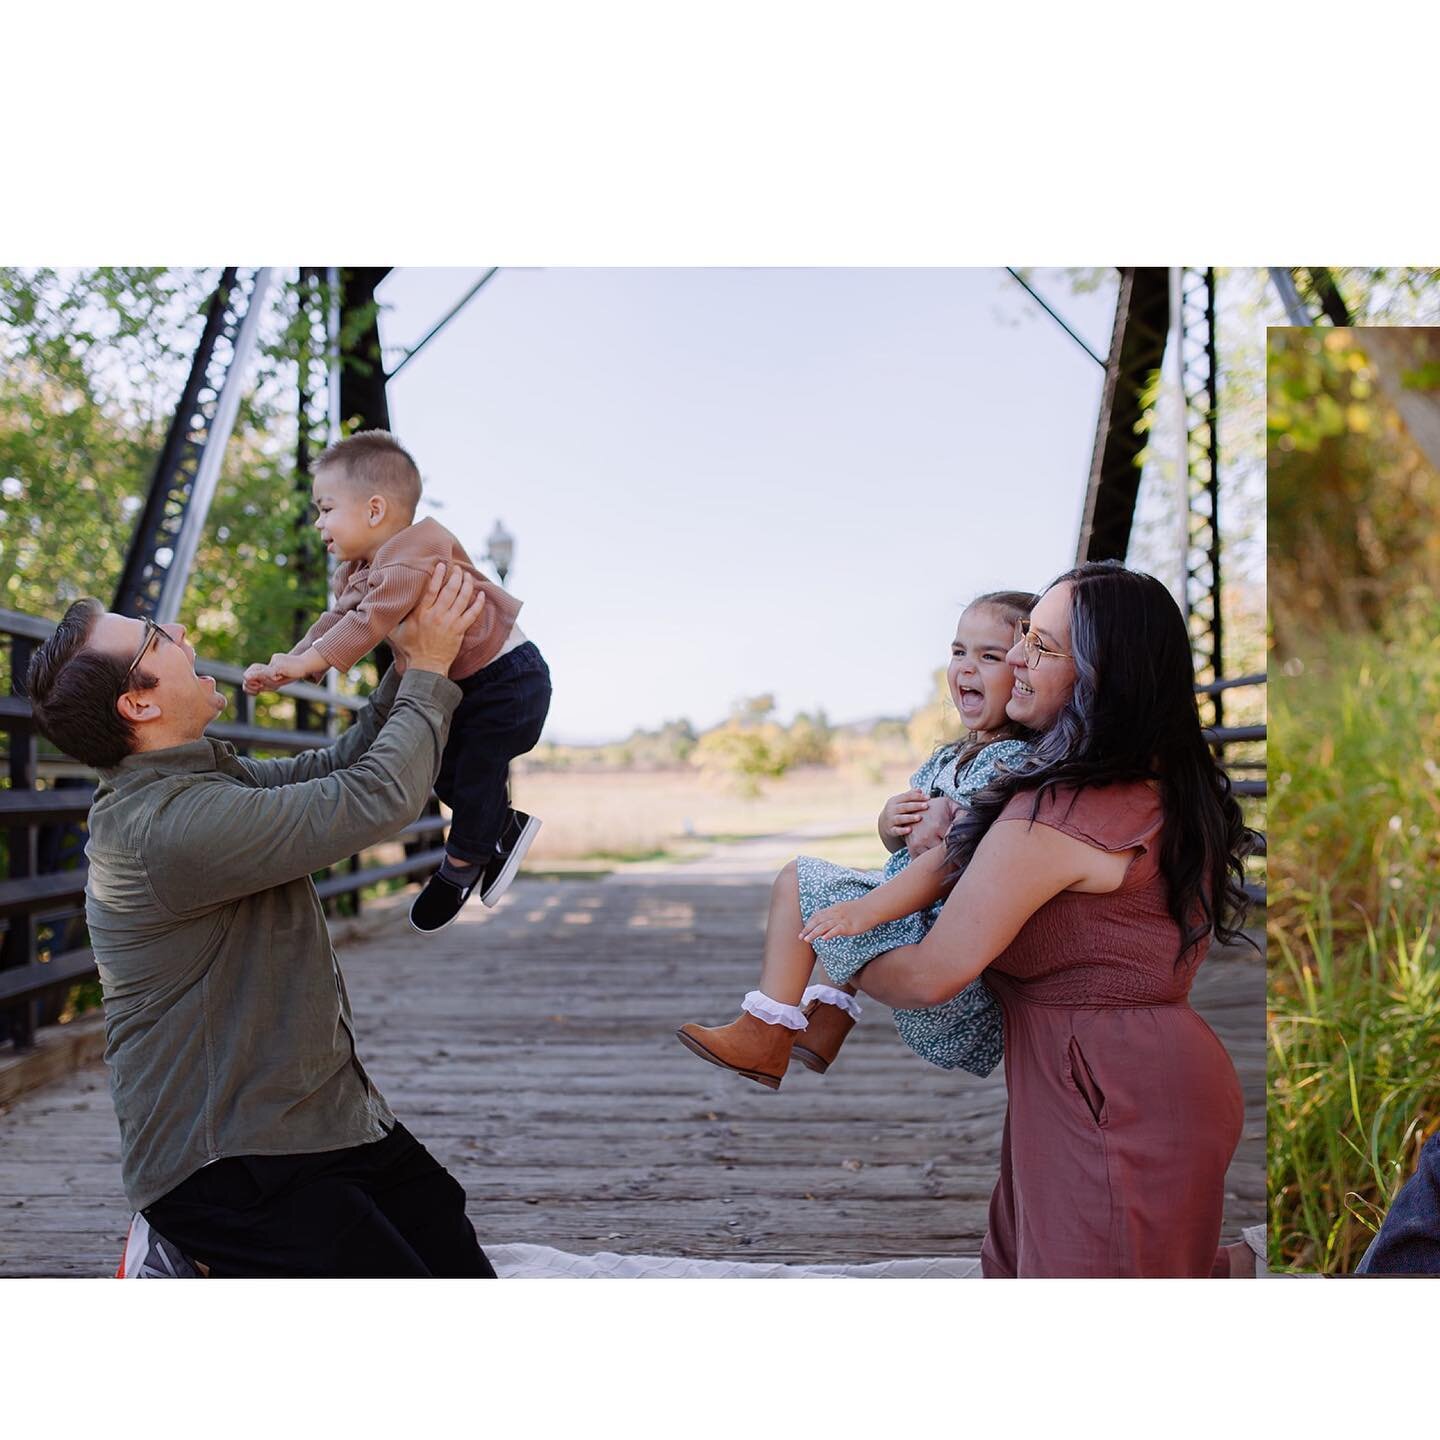 The McCartneys 🍁

This family is incredible. They are full of so much love and joy. Being able to capture these moments with them fills me up &hearts;️
.
.
.
.
#coloradofamilyphotographer #coloradofamilyportraits #coloradofall #coloradophotographer 